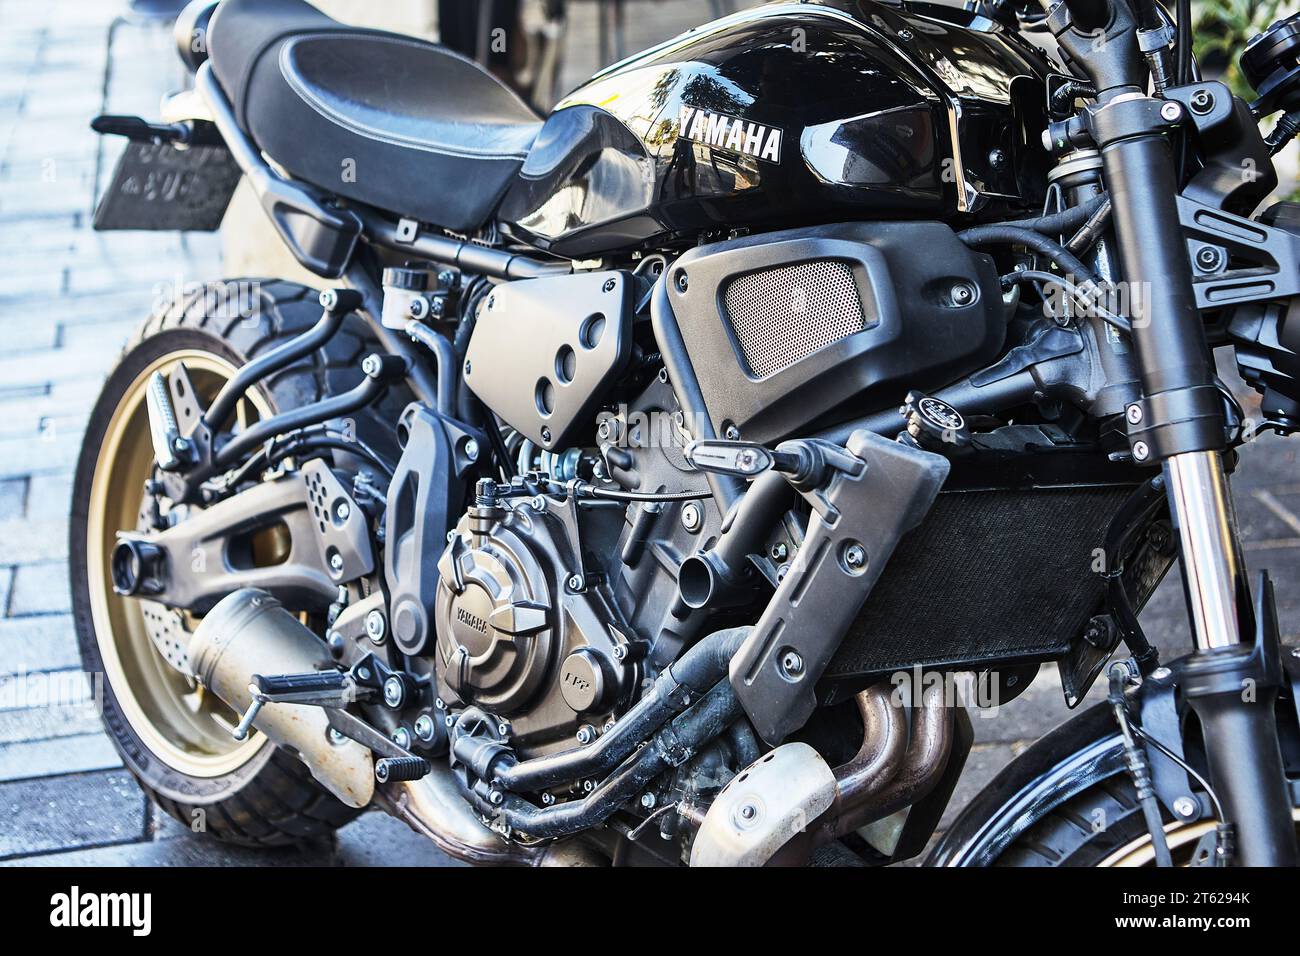 Yamaha motorcycle engine close-up, all engine parts are visible. Stock Photo